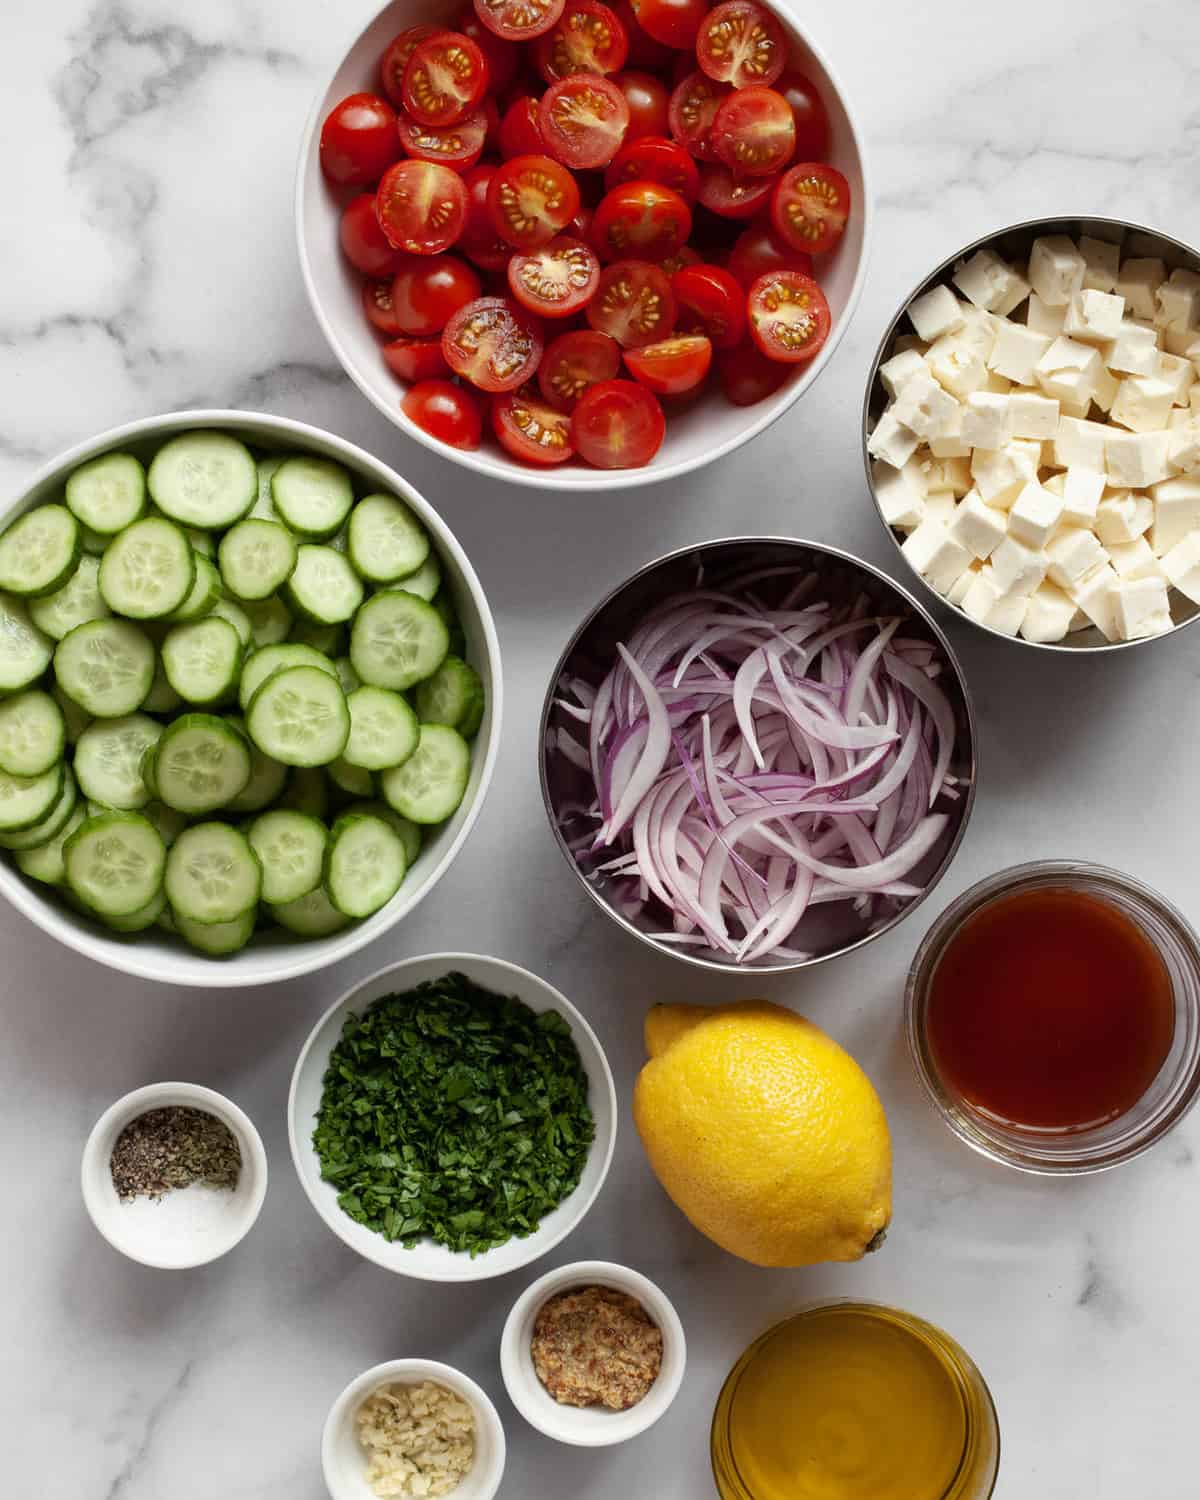 Ingredients including cucumbers, tomatoes, red onions. feta, parsley, lemon, olive oil, spices and garlic.